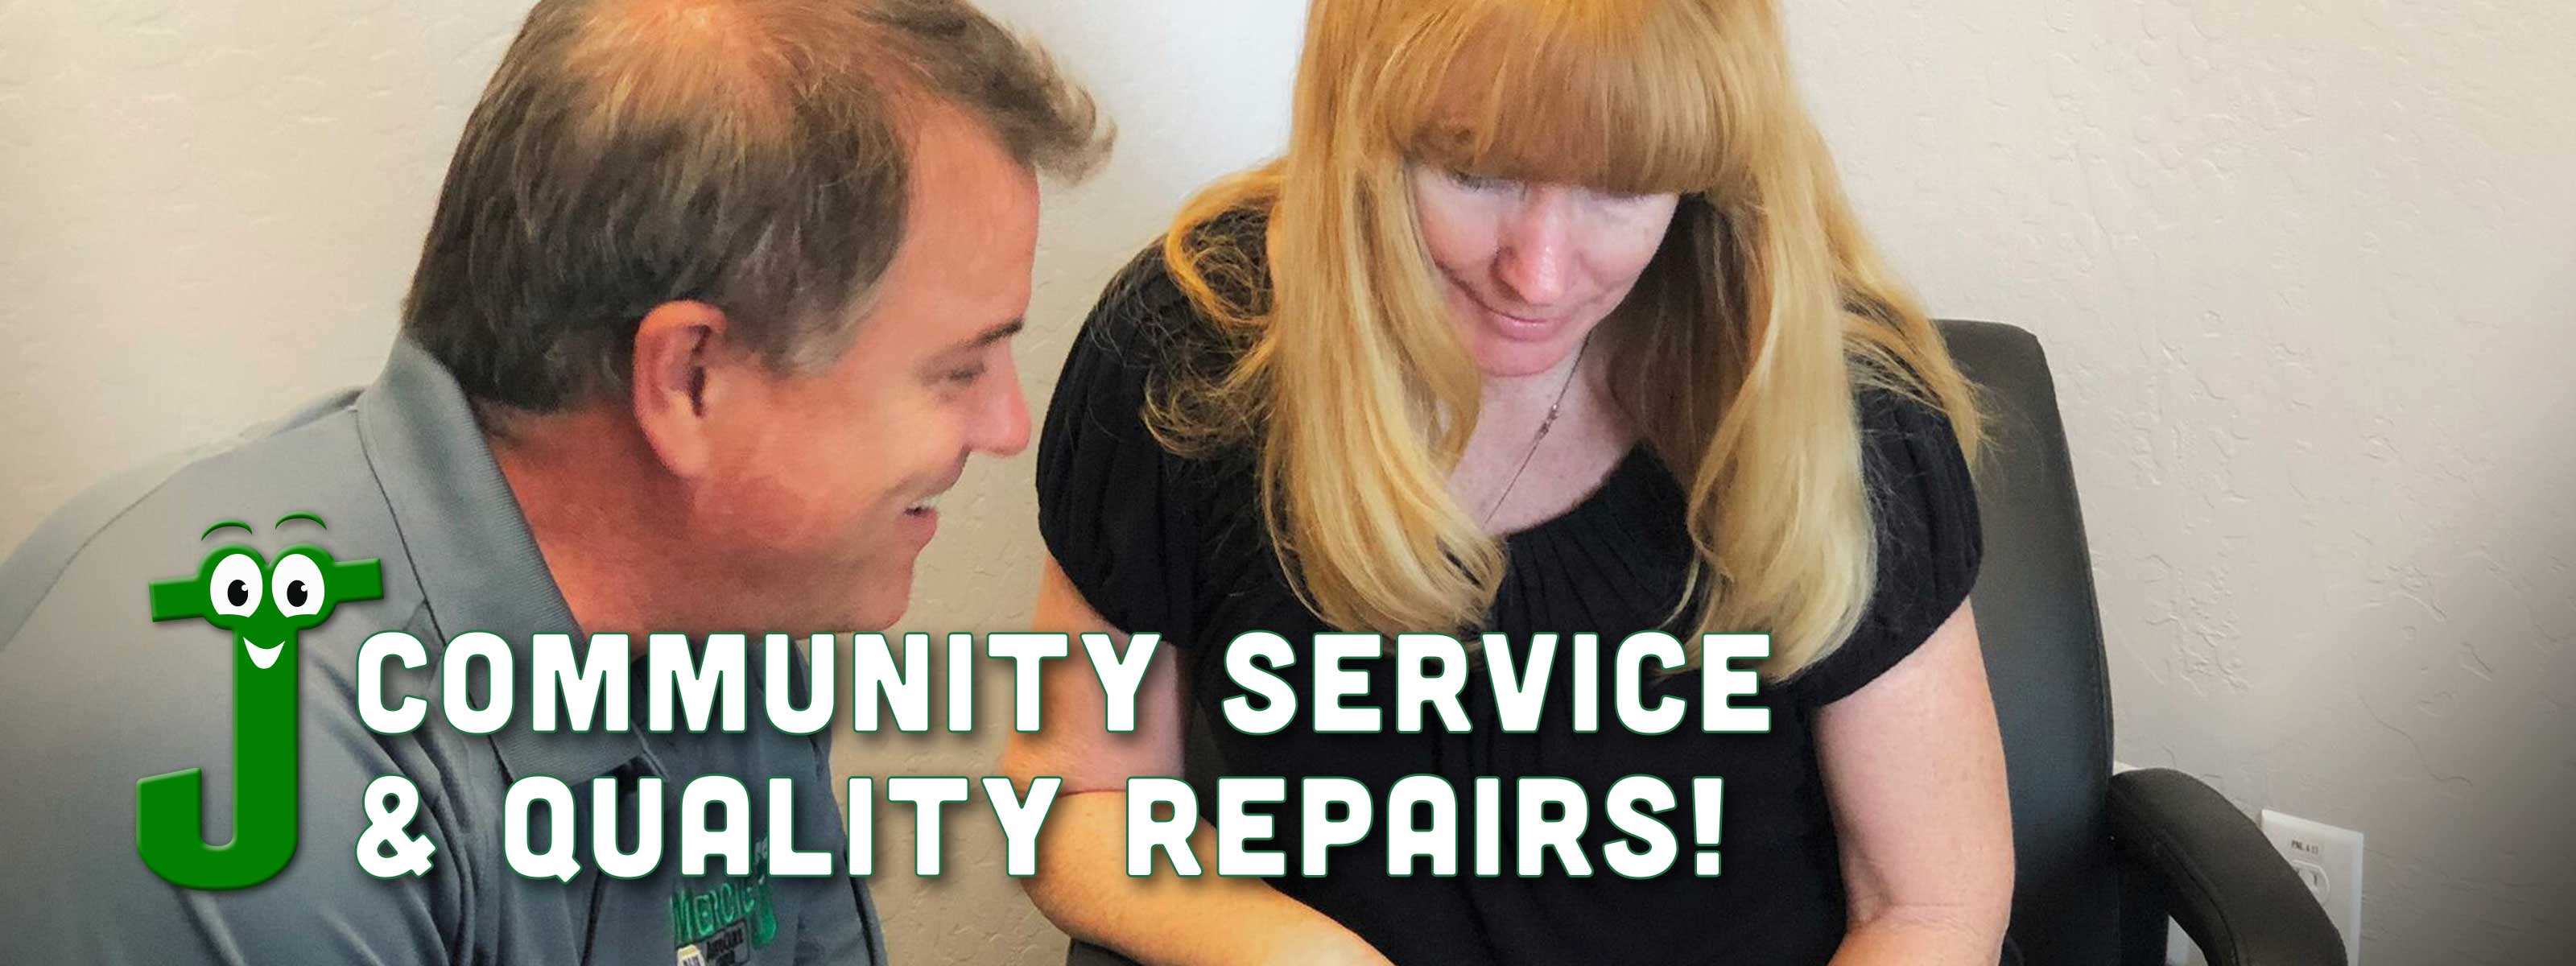 Community service and quality repairs